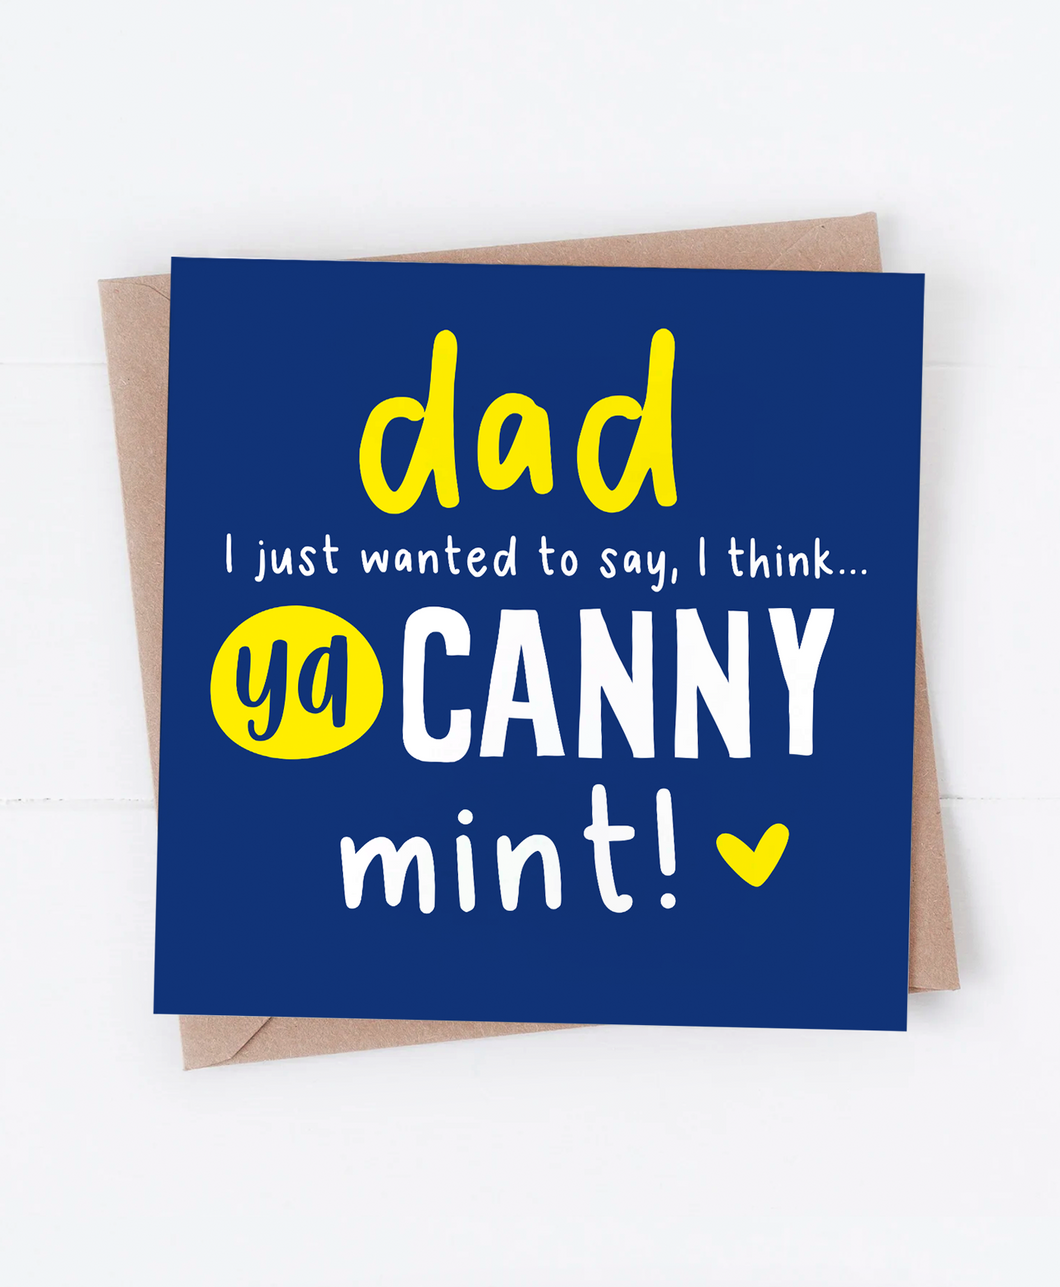 Dad Canny Mint - Greetings Card